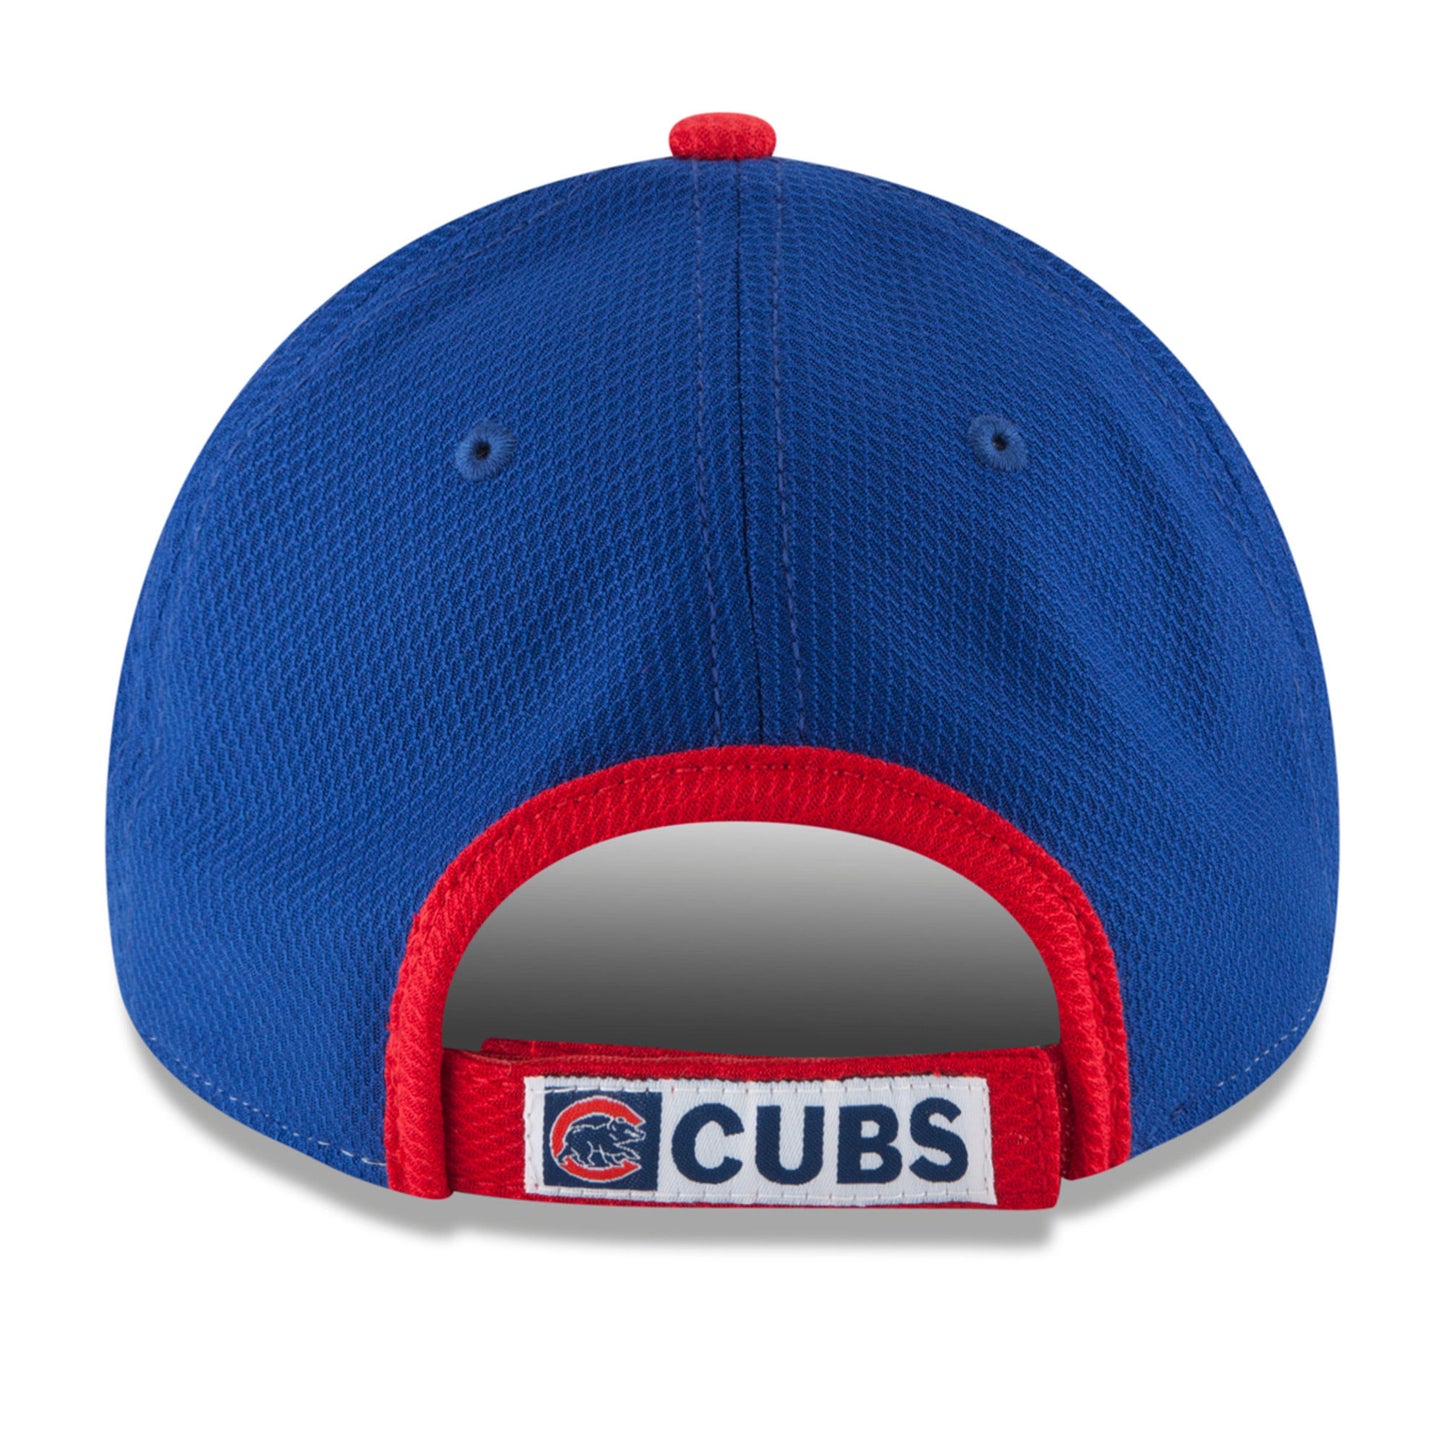 Men's Chicago Cubs New Era White/Red Perforated Block 9FORTY Adjustable Hat